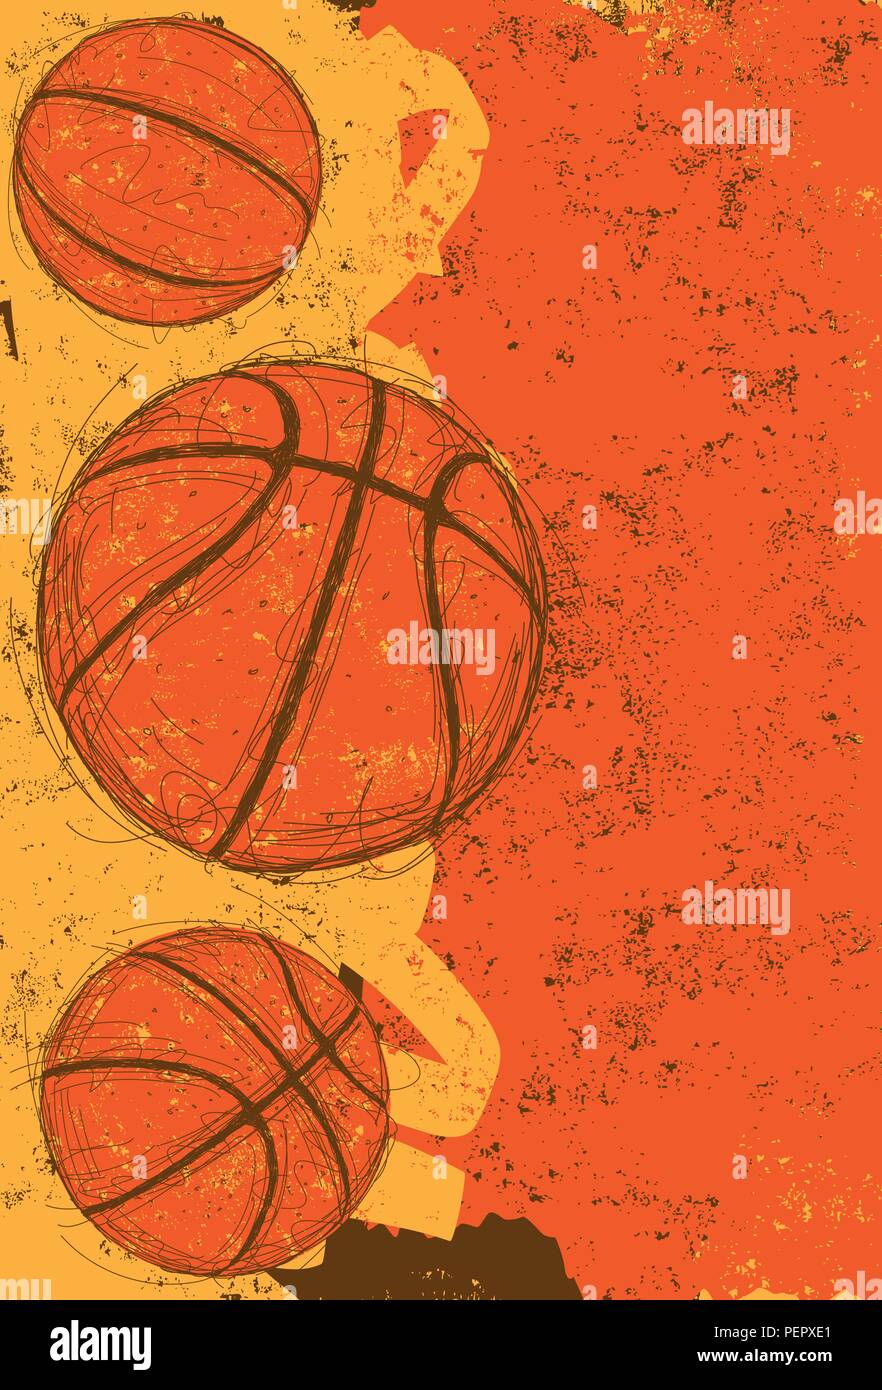 Three basketballs. Sketchy, hand drawn basketballs over an abstract background. Stock Vector